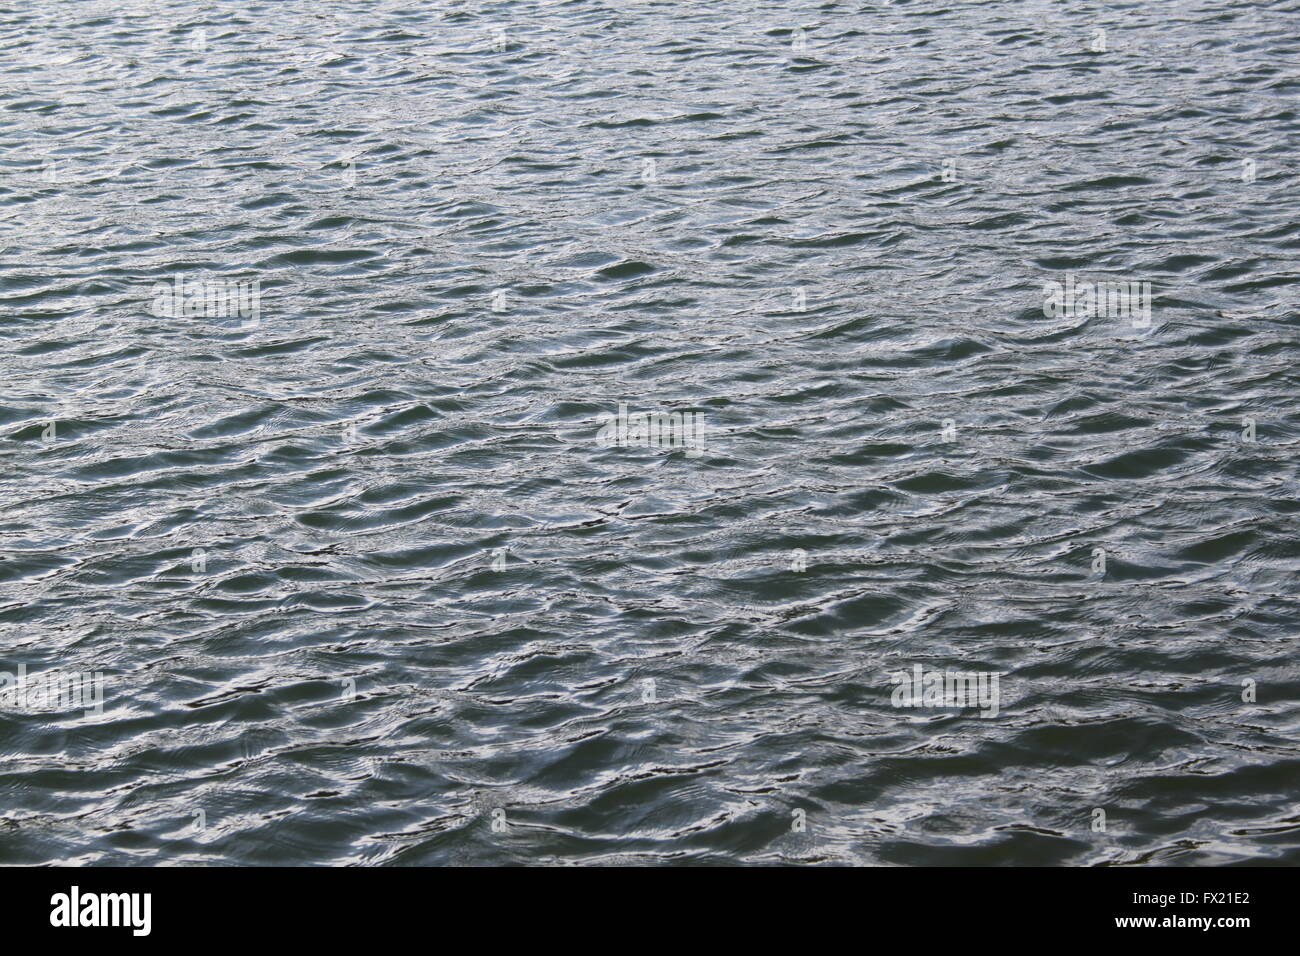 Rippling water background or texture Stock Photo